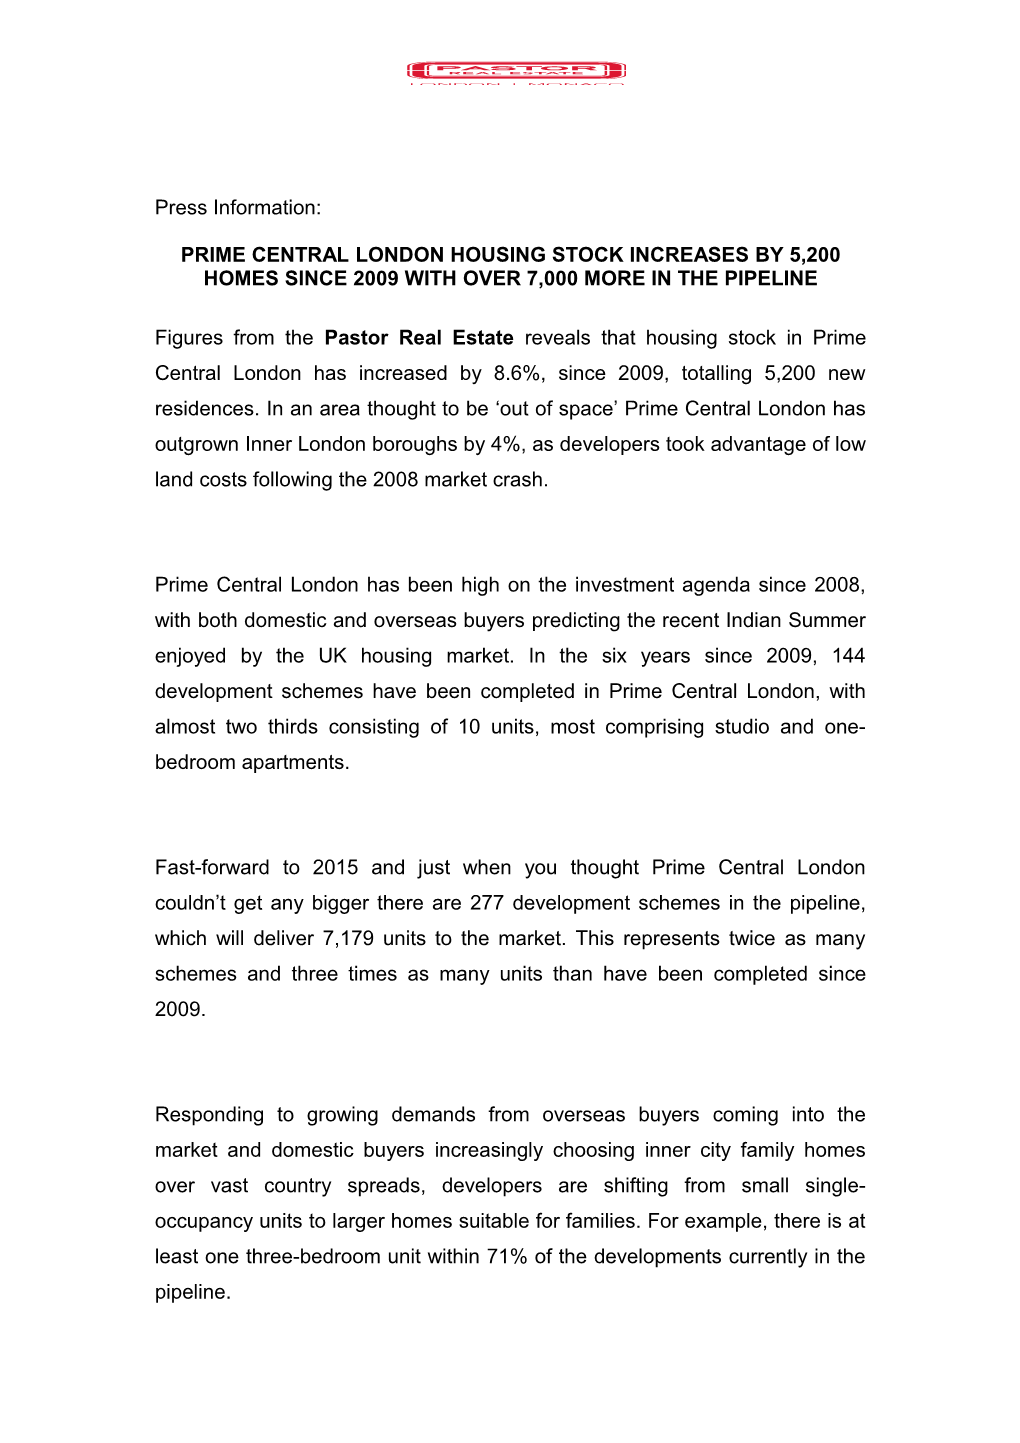 Prime Central London Housing Stock Increases by 5,200 Homes Since 2009 with Over 7,000